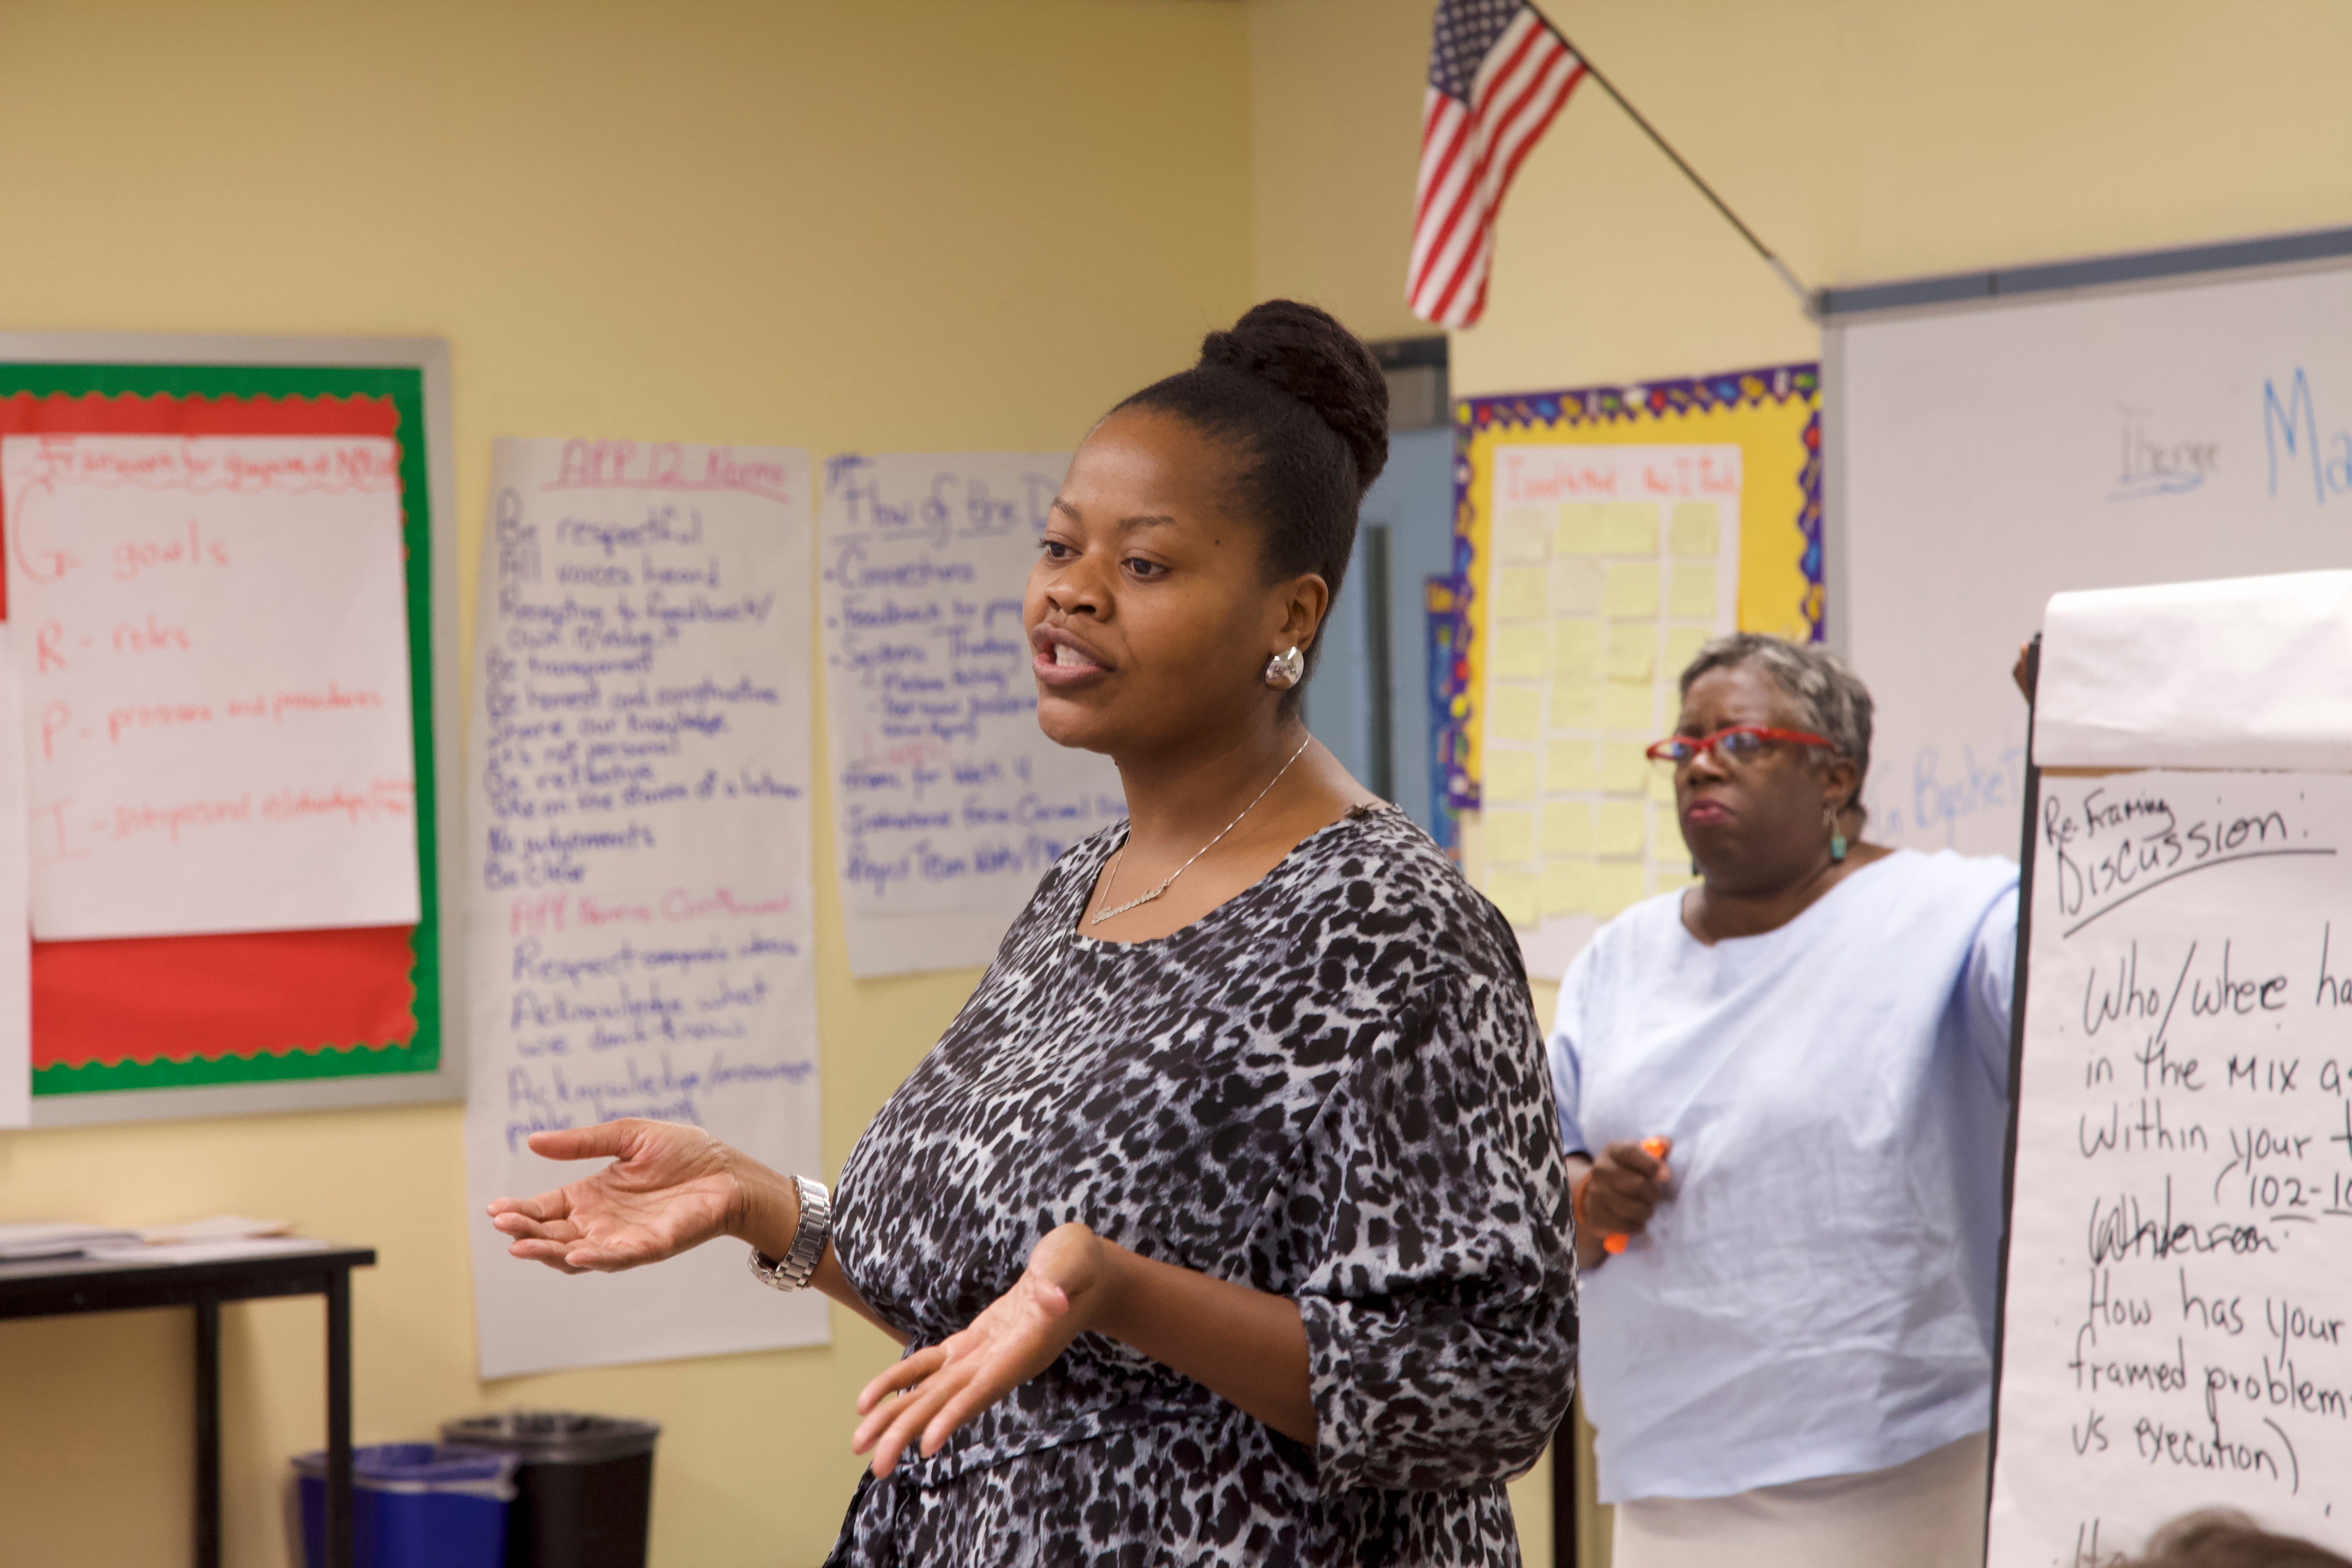 Education leaders engage in discussion in a classroom.